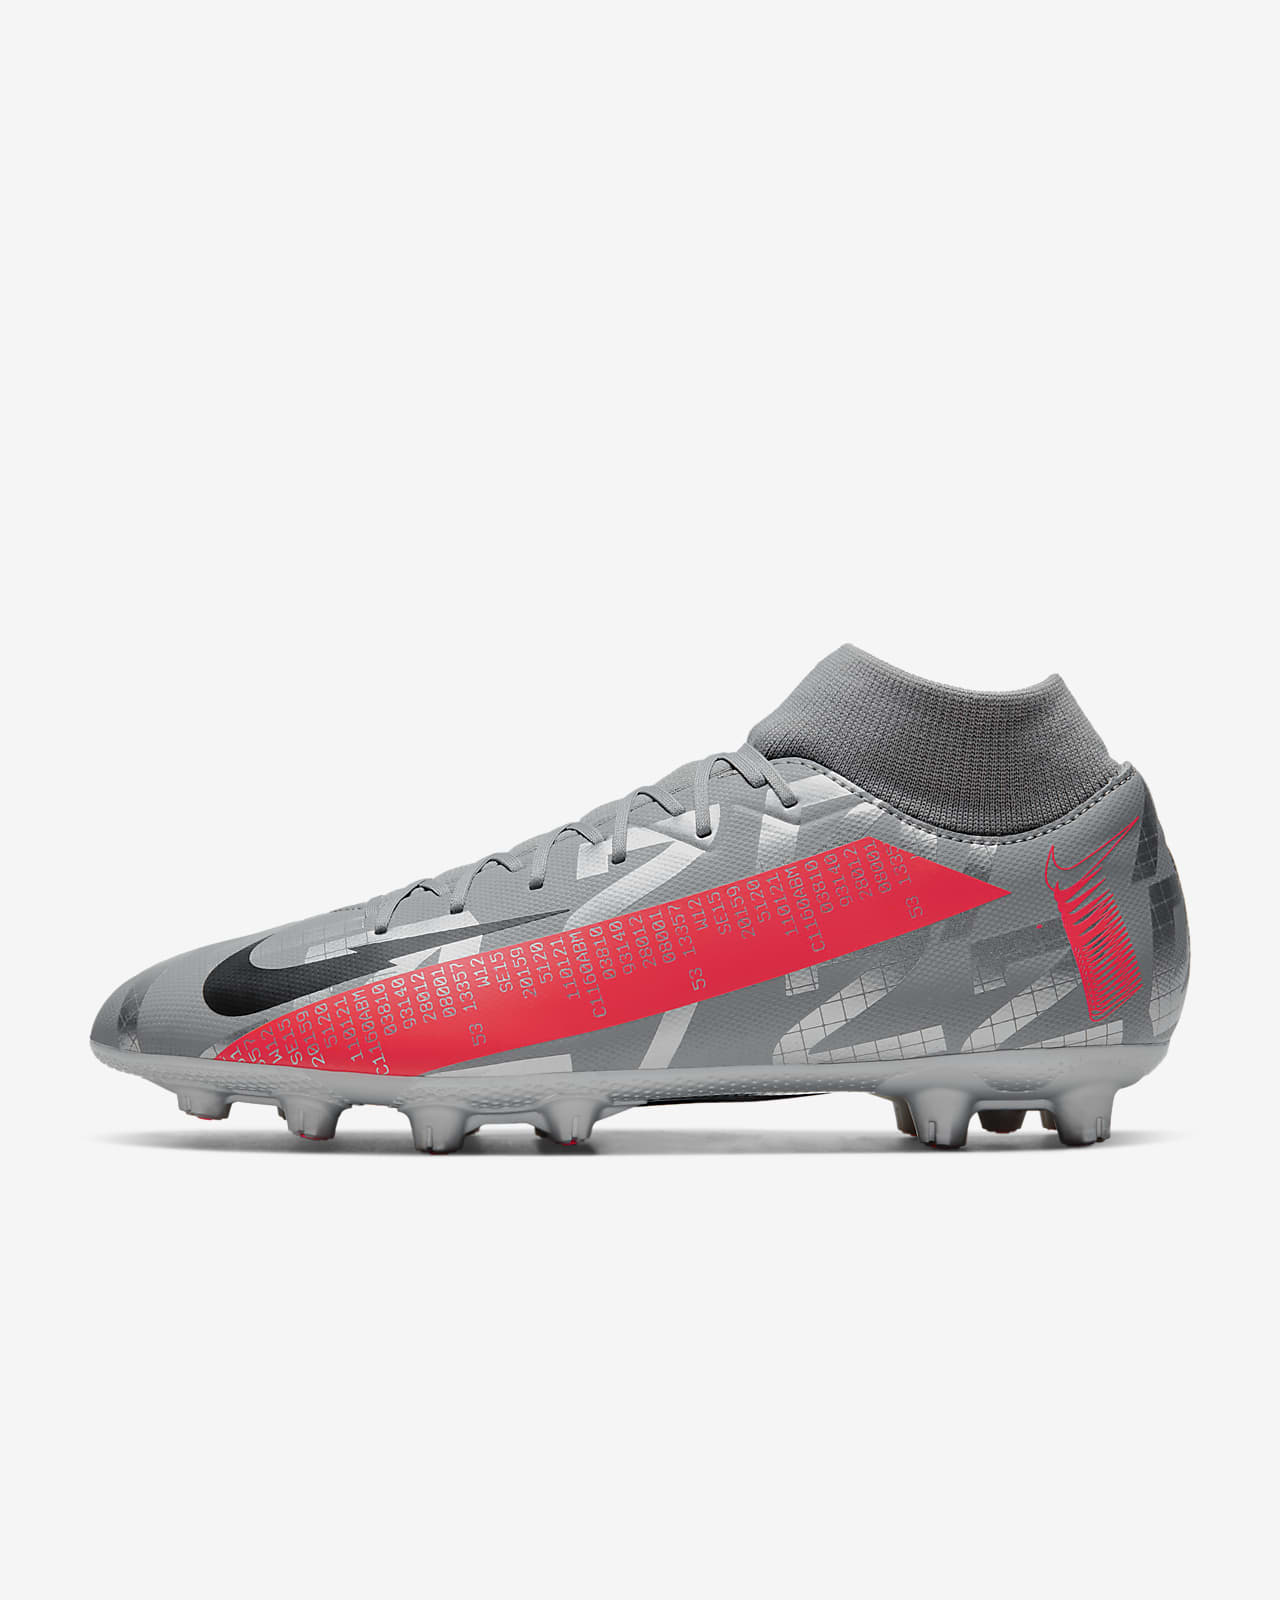 Nike Mercurial Superfly Academy HG Hard-Ground Soccer Cleats. JP